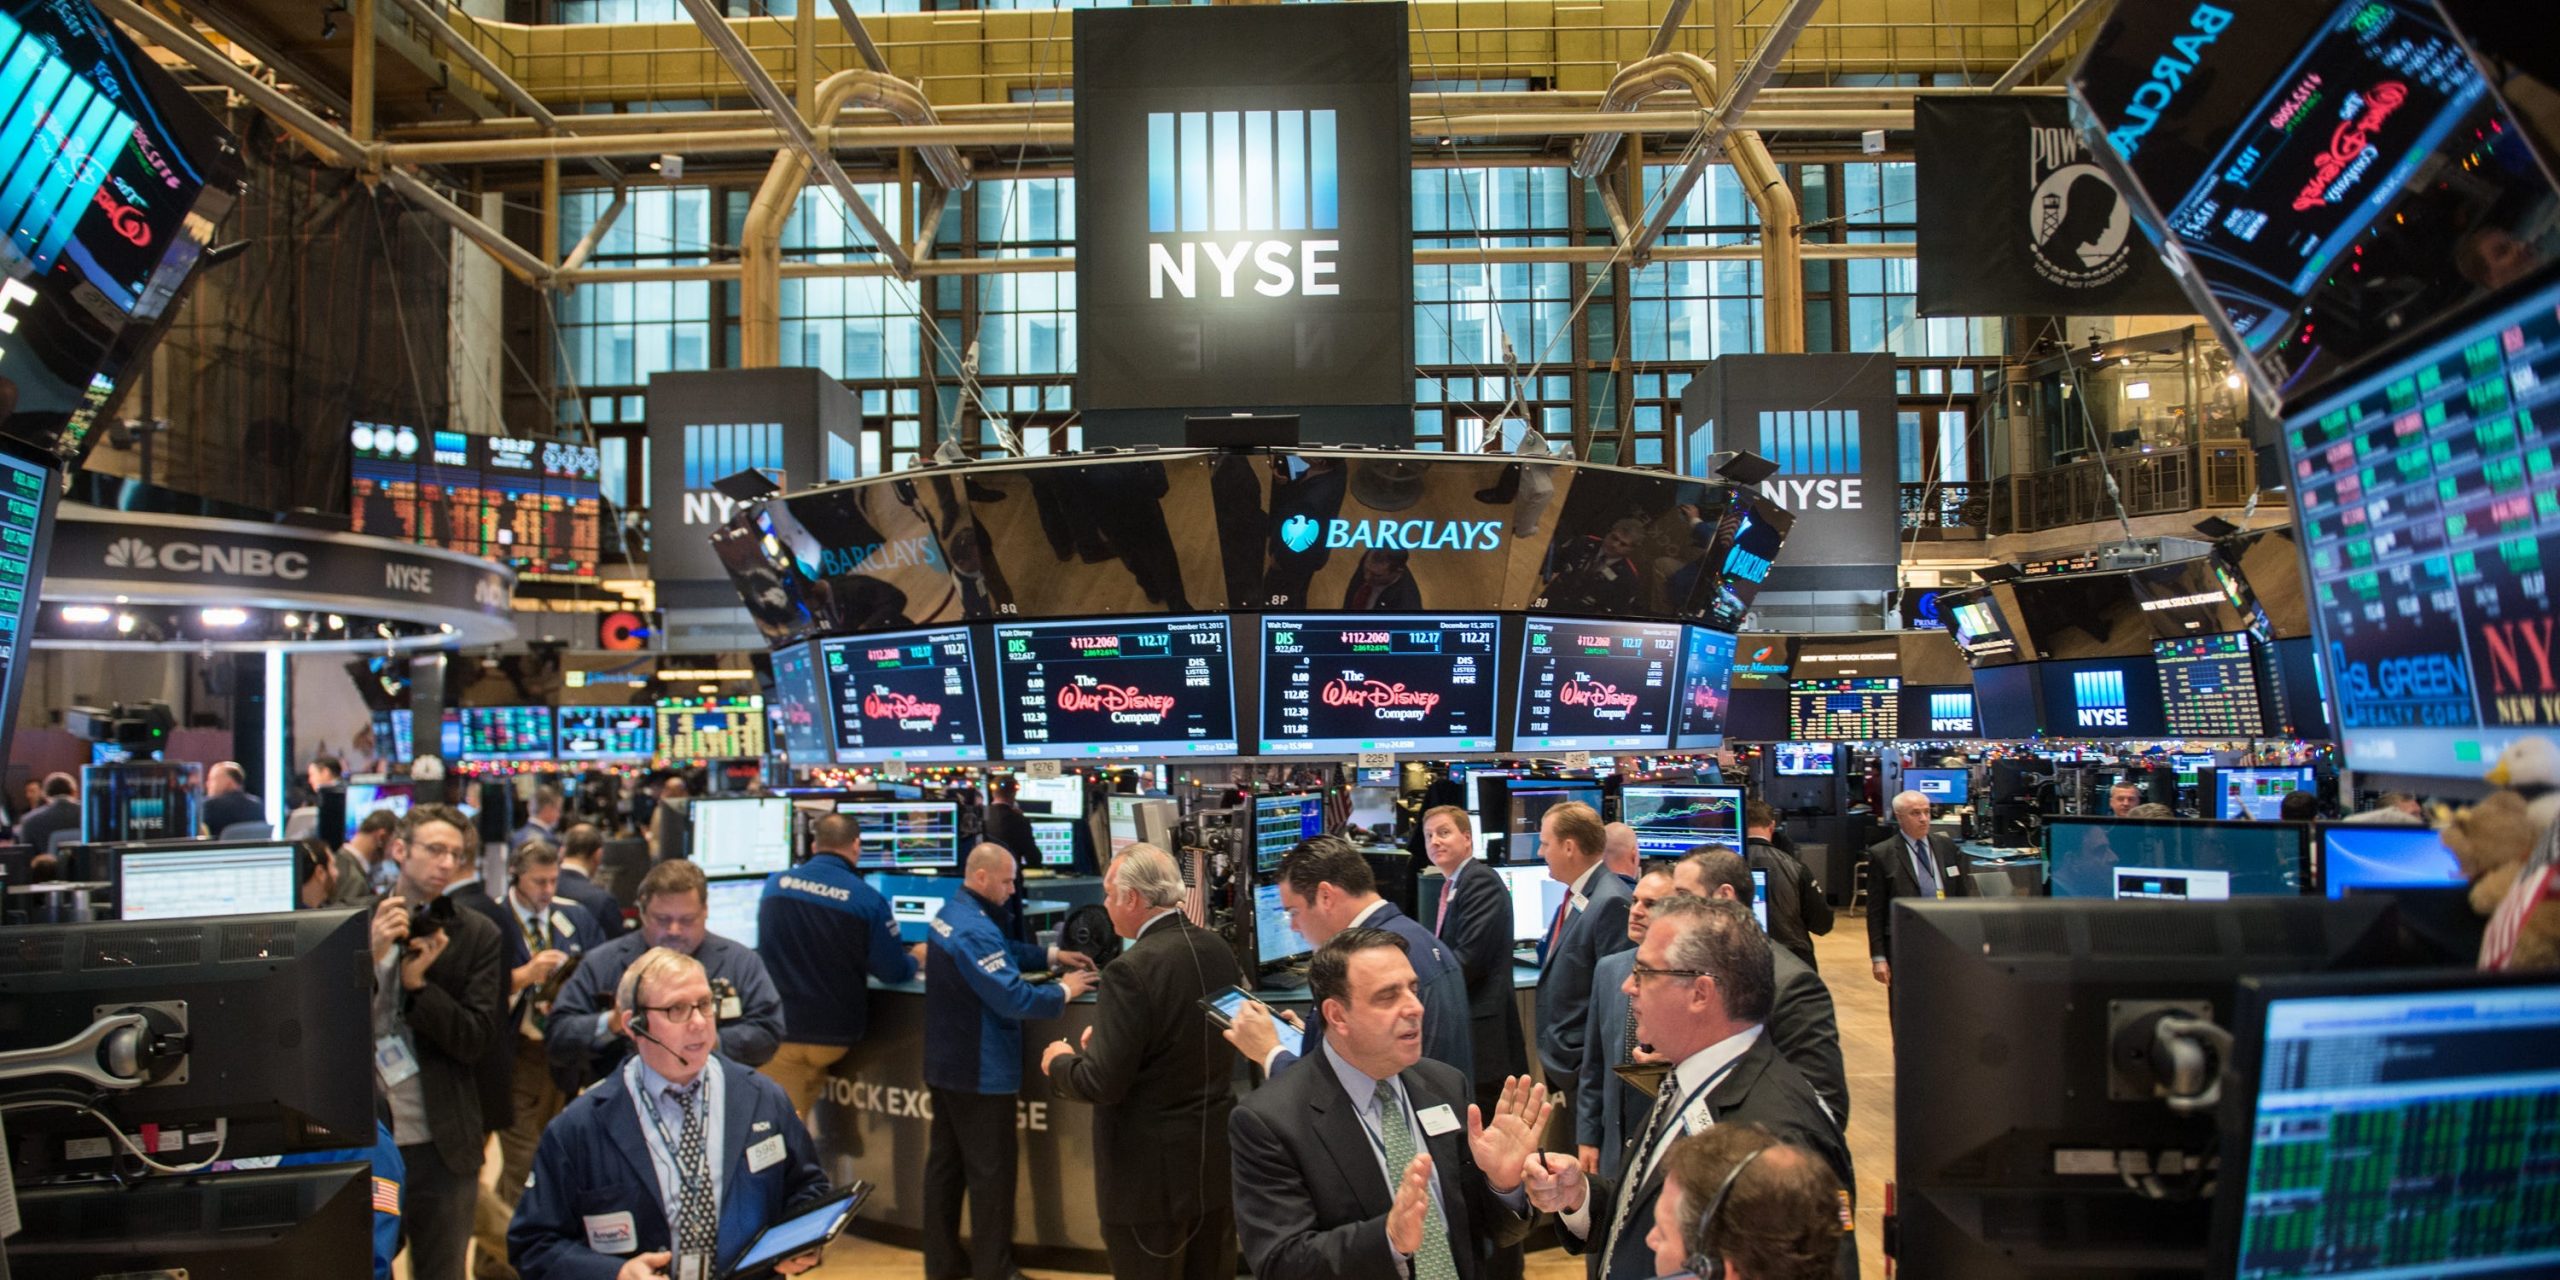 General view of atmosphere during the NYSE opening bell ceremony at the New York Stock Exchange on December 15